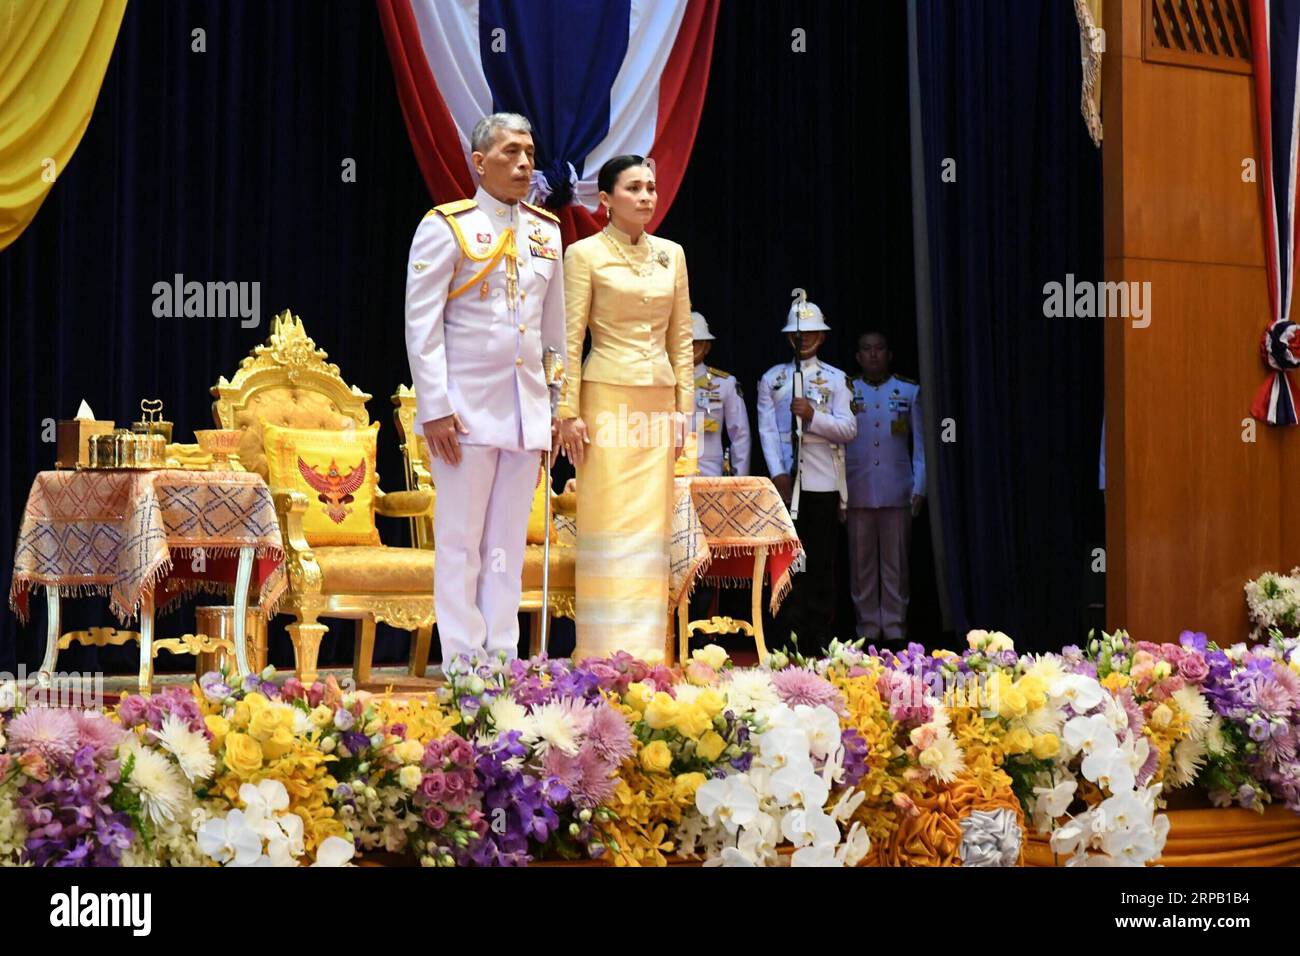 Entertainment Bilder des Tages 190524 -- BANGKOK, May 24, 2019 Xinhua -- Thailand s Their Majesties the King Maha Vajiralongkorn L and Queen Suthida preside over the opening ceremony for parliament following the March 24 election at the Foreign Ministry in Bangkok, Thailand, May 24, 2019. A total of 498 MPs and 250 senators attended the opening ceremony for parliament alongside Prime Minister Prayut Chan-o-cha, members of his cabinet, members of the National Council for Peace and Order and heads of independent agencies. Xinhua/Thai Parliament House THAILAND-BANGKOK-PARLIAMENT-OPENING SESSION P Stock Photo